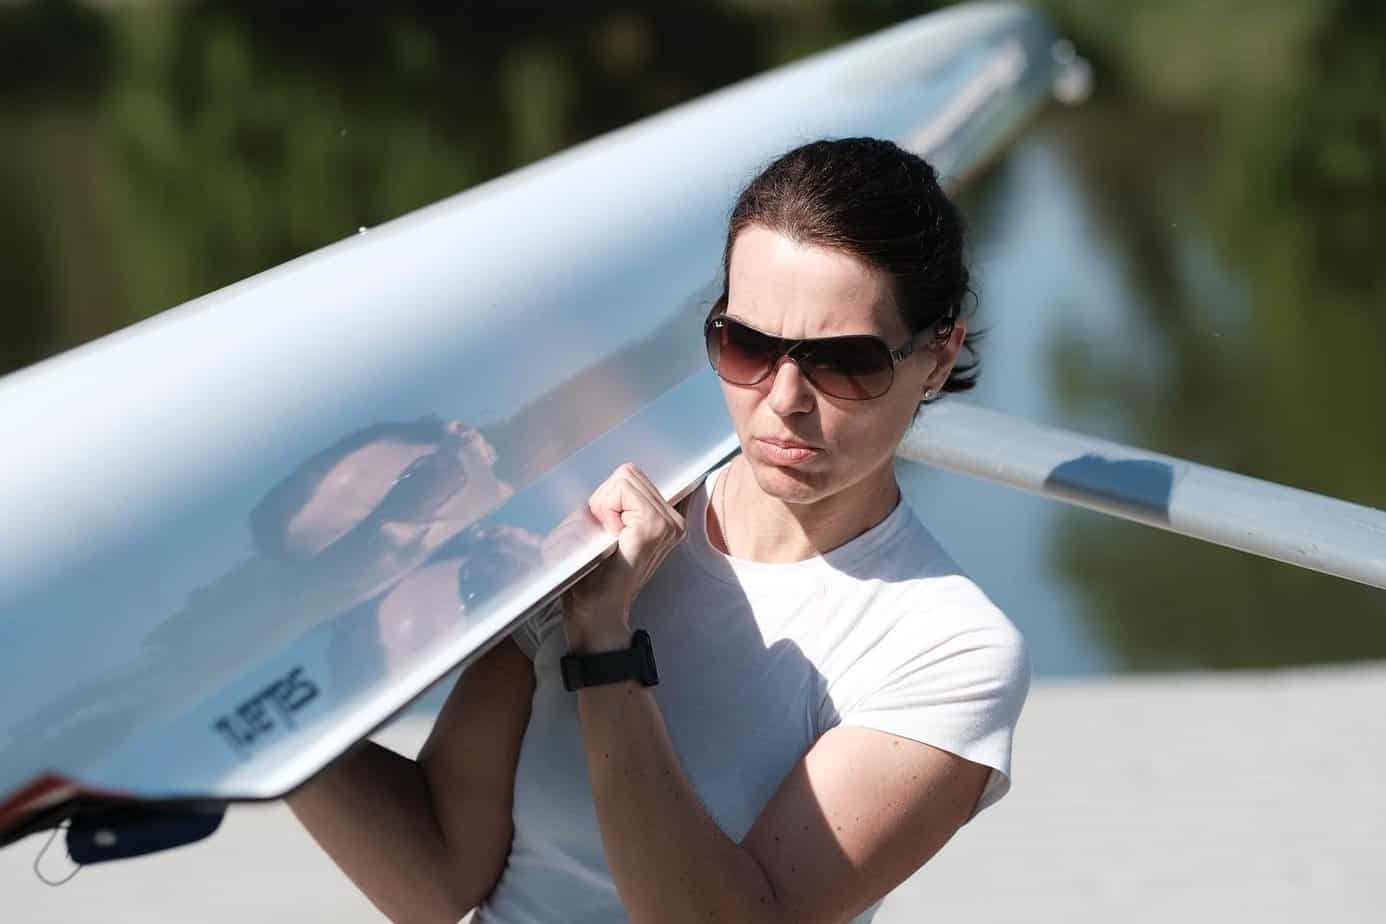 Lady in a white shirt carrying a rowing shell